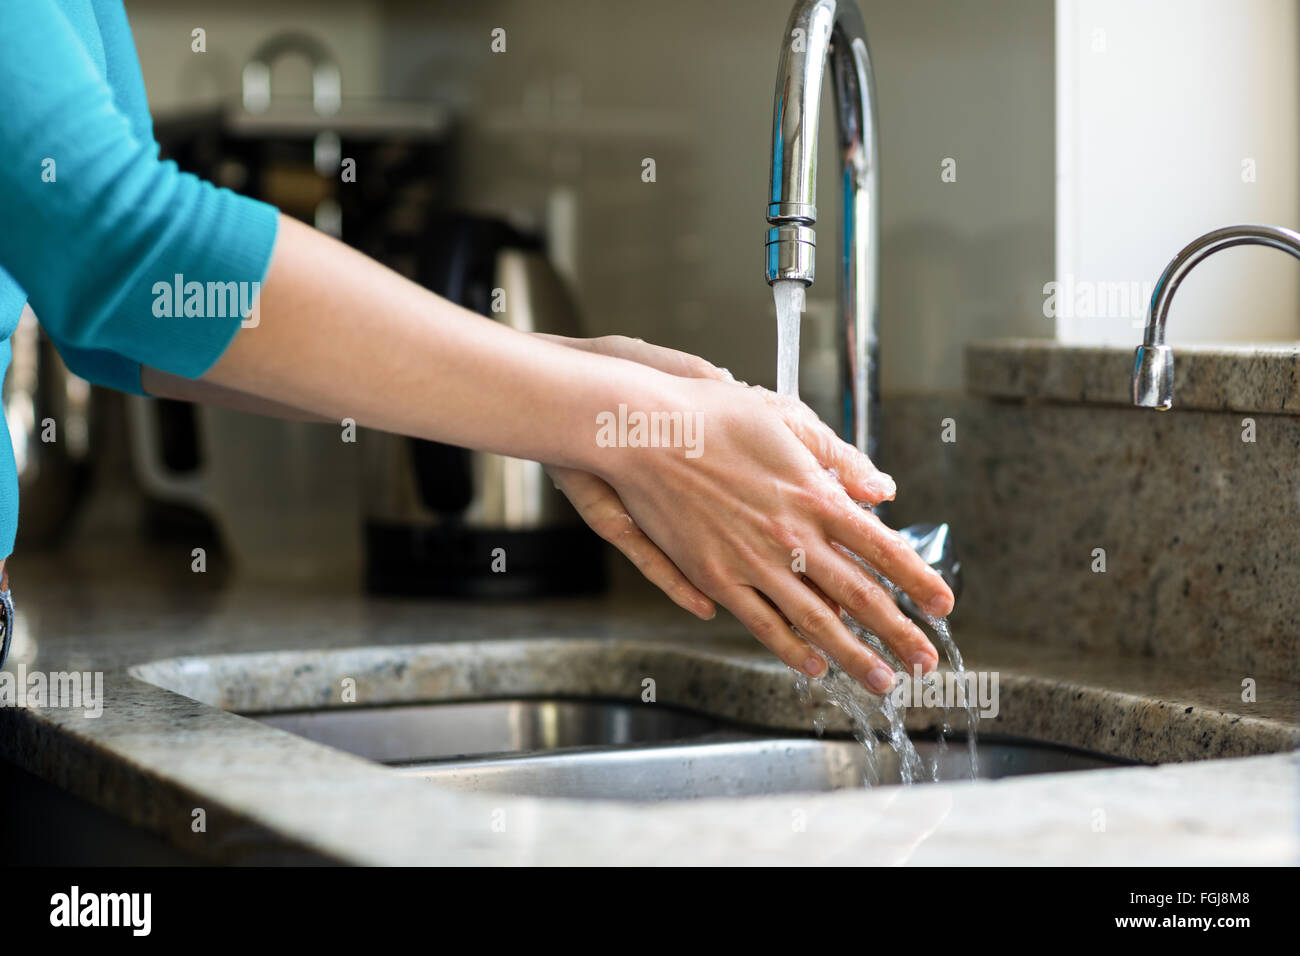 Pretty woman washing her hands Stock Photo